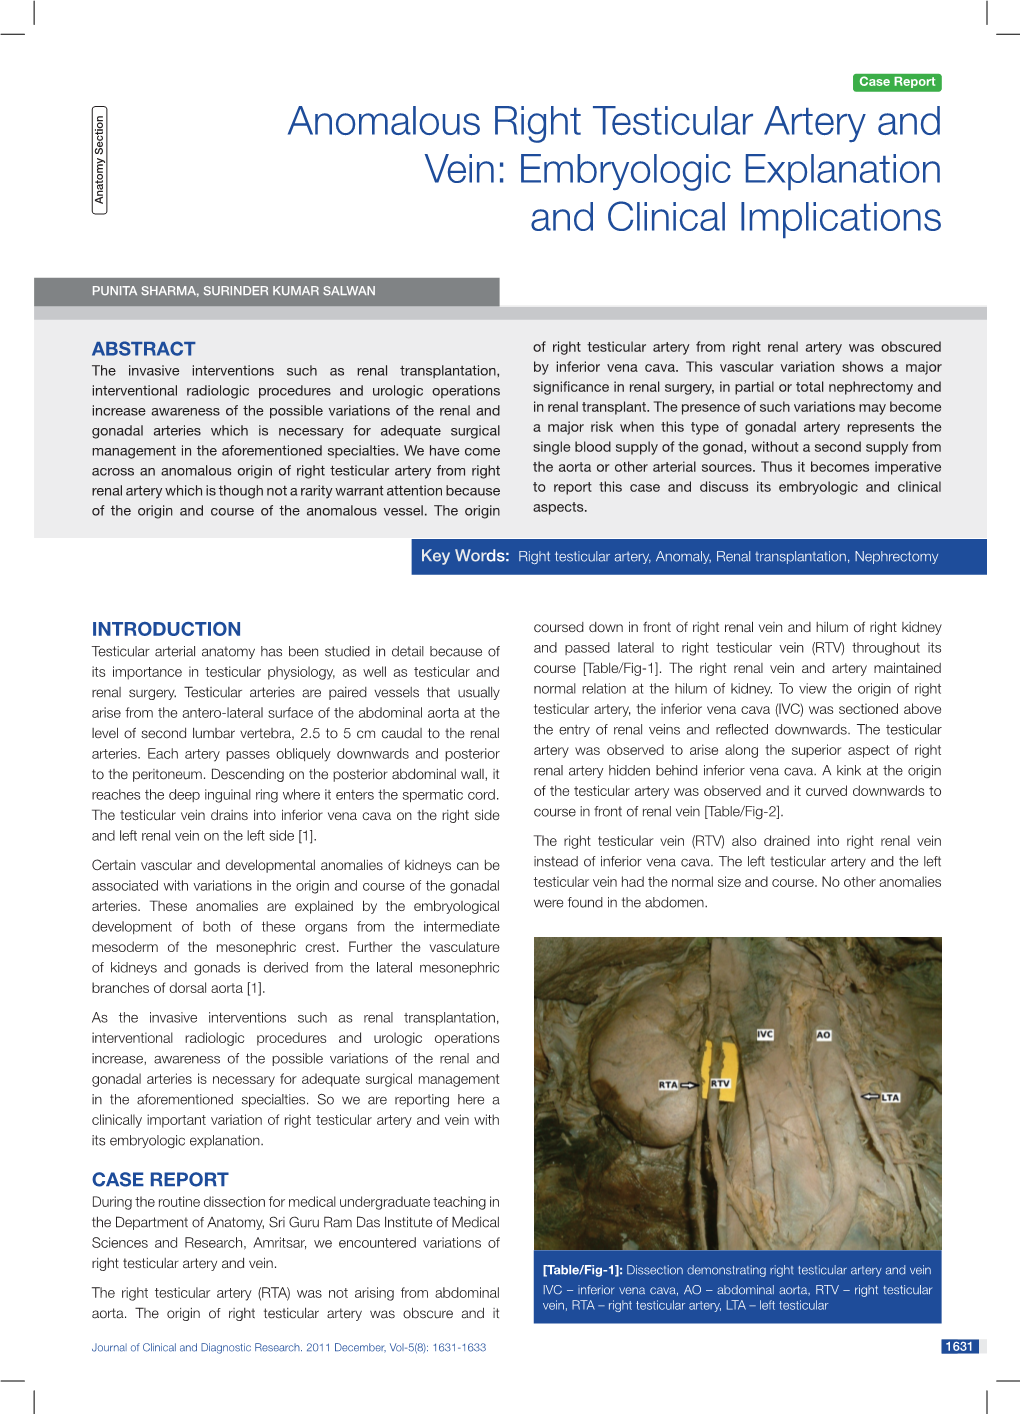 Anomalous Right Testicular Artery and Vein: Embryologic Explanation and Clinical Implications